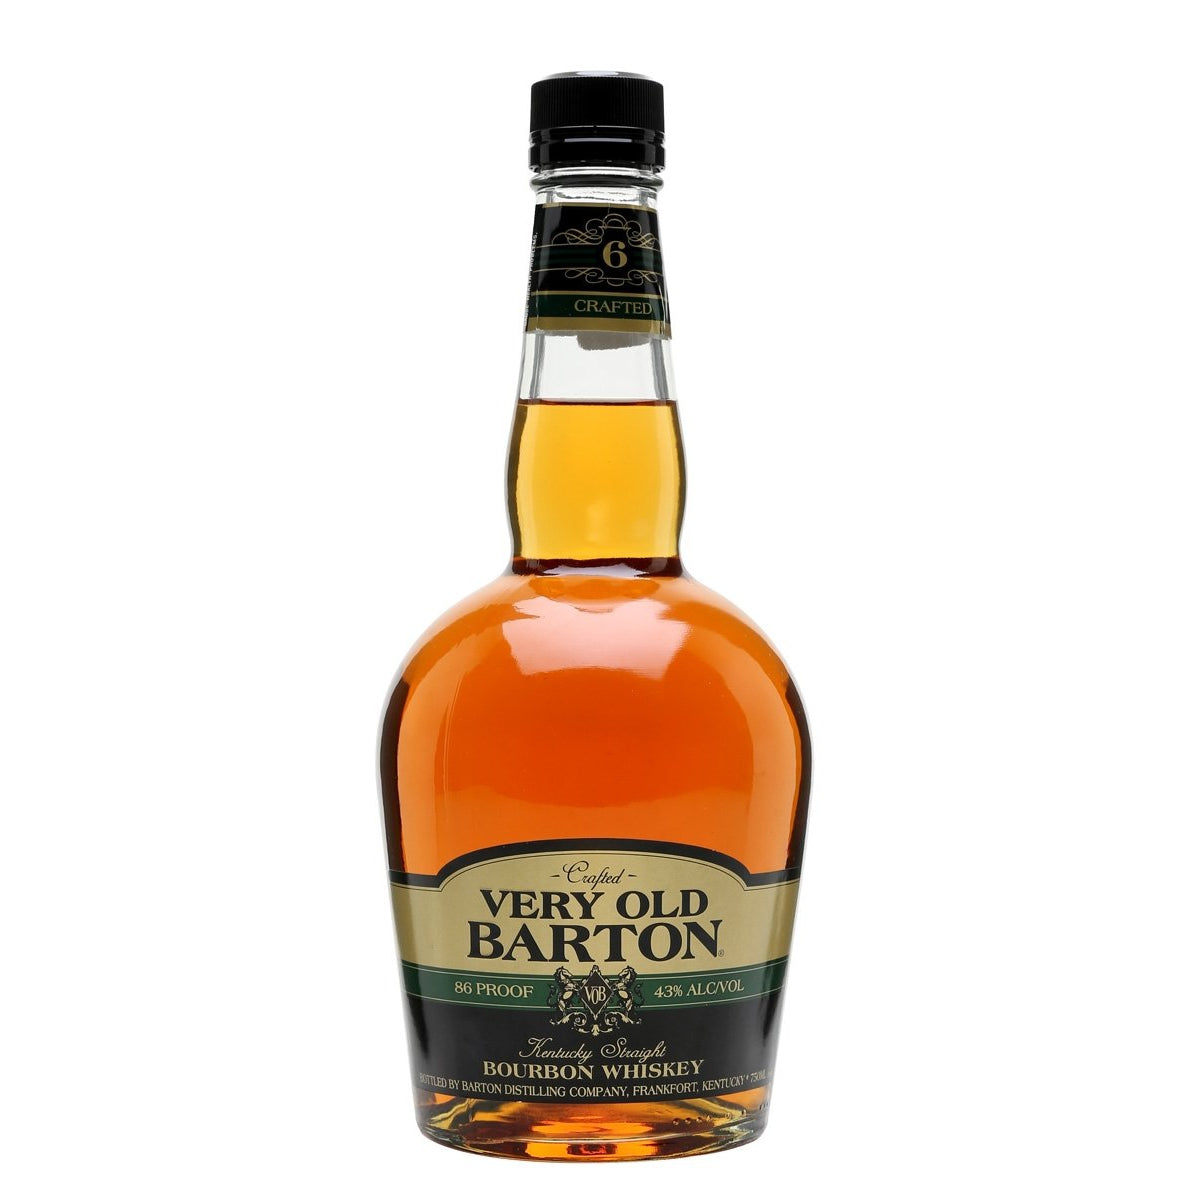 Very Old Barton 86 Proof 1 Liter